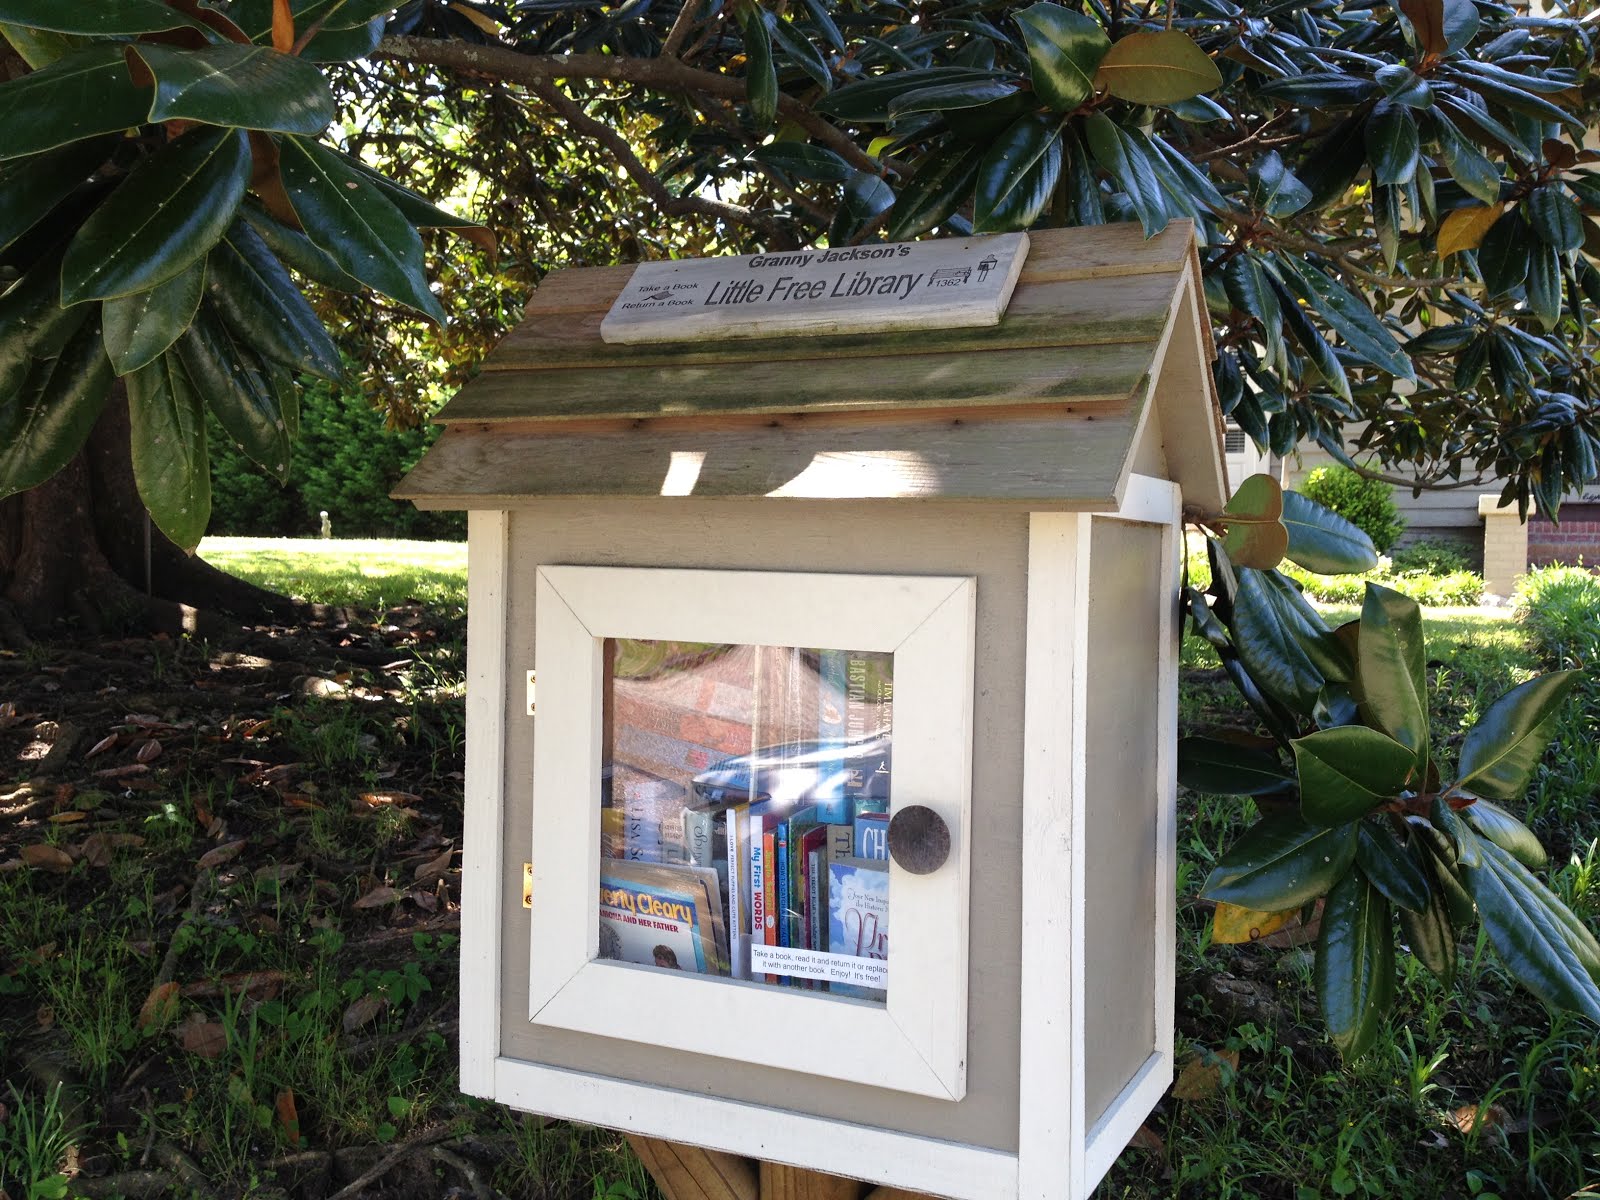 A Little Free Library